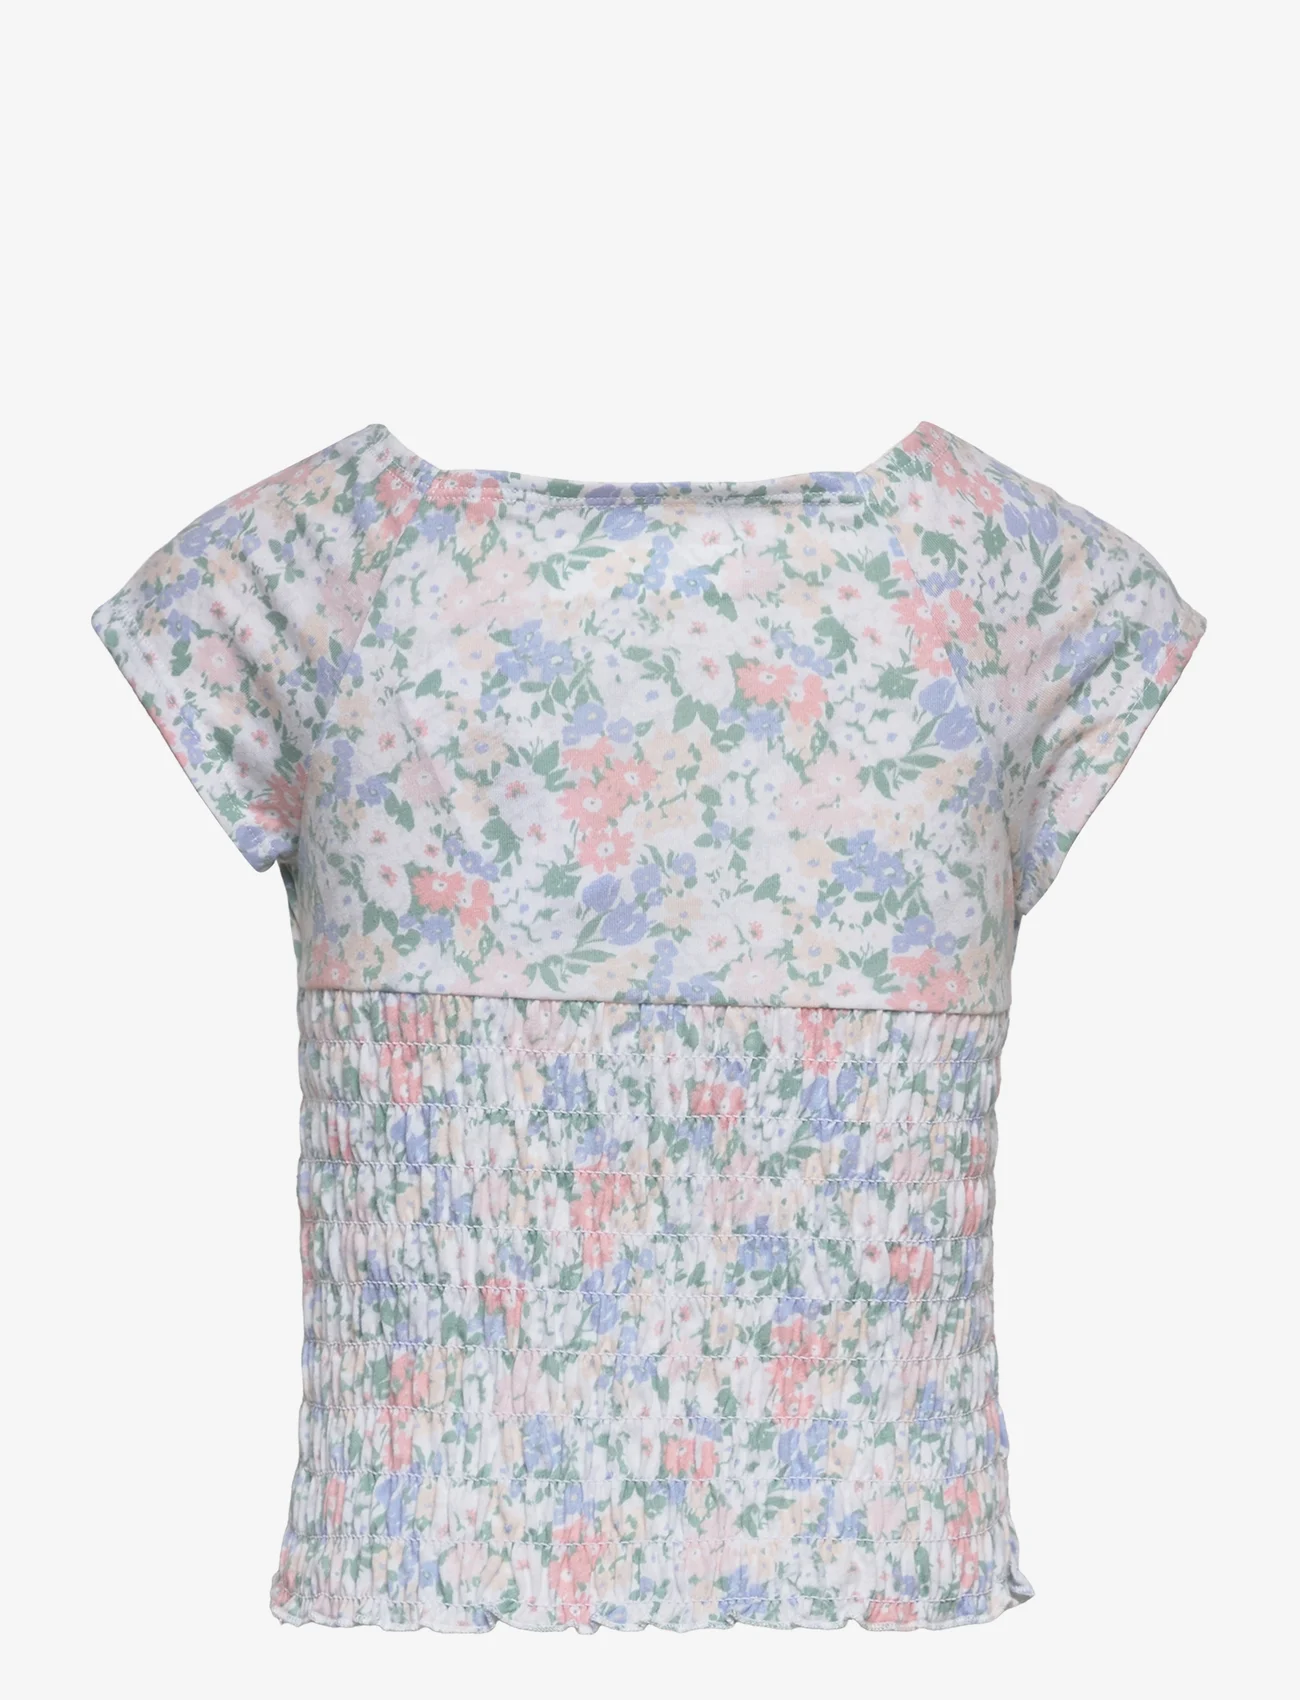 Abercrombie & Fitch - kids GIRLS KNITS - lyhythihaiset t-paidat - multifloral - 1